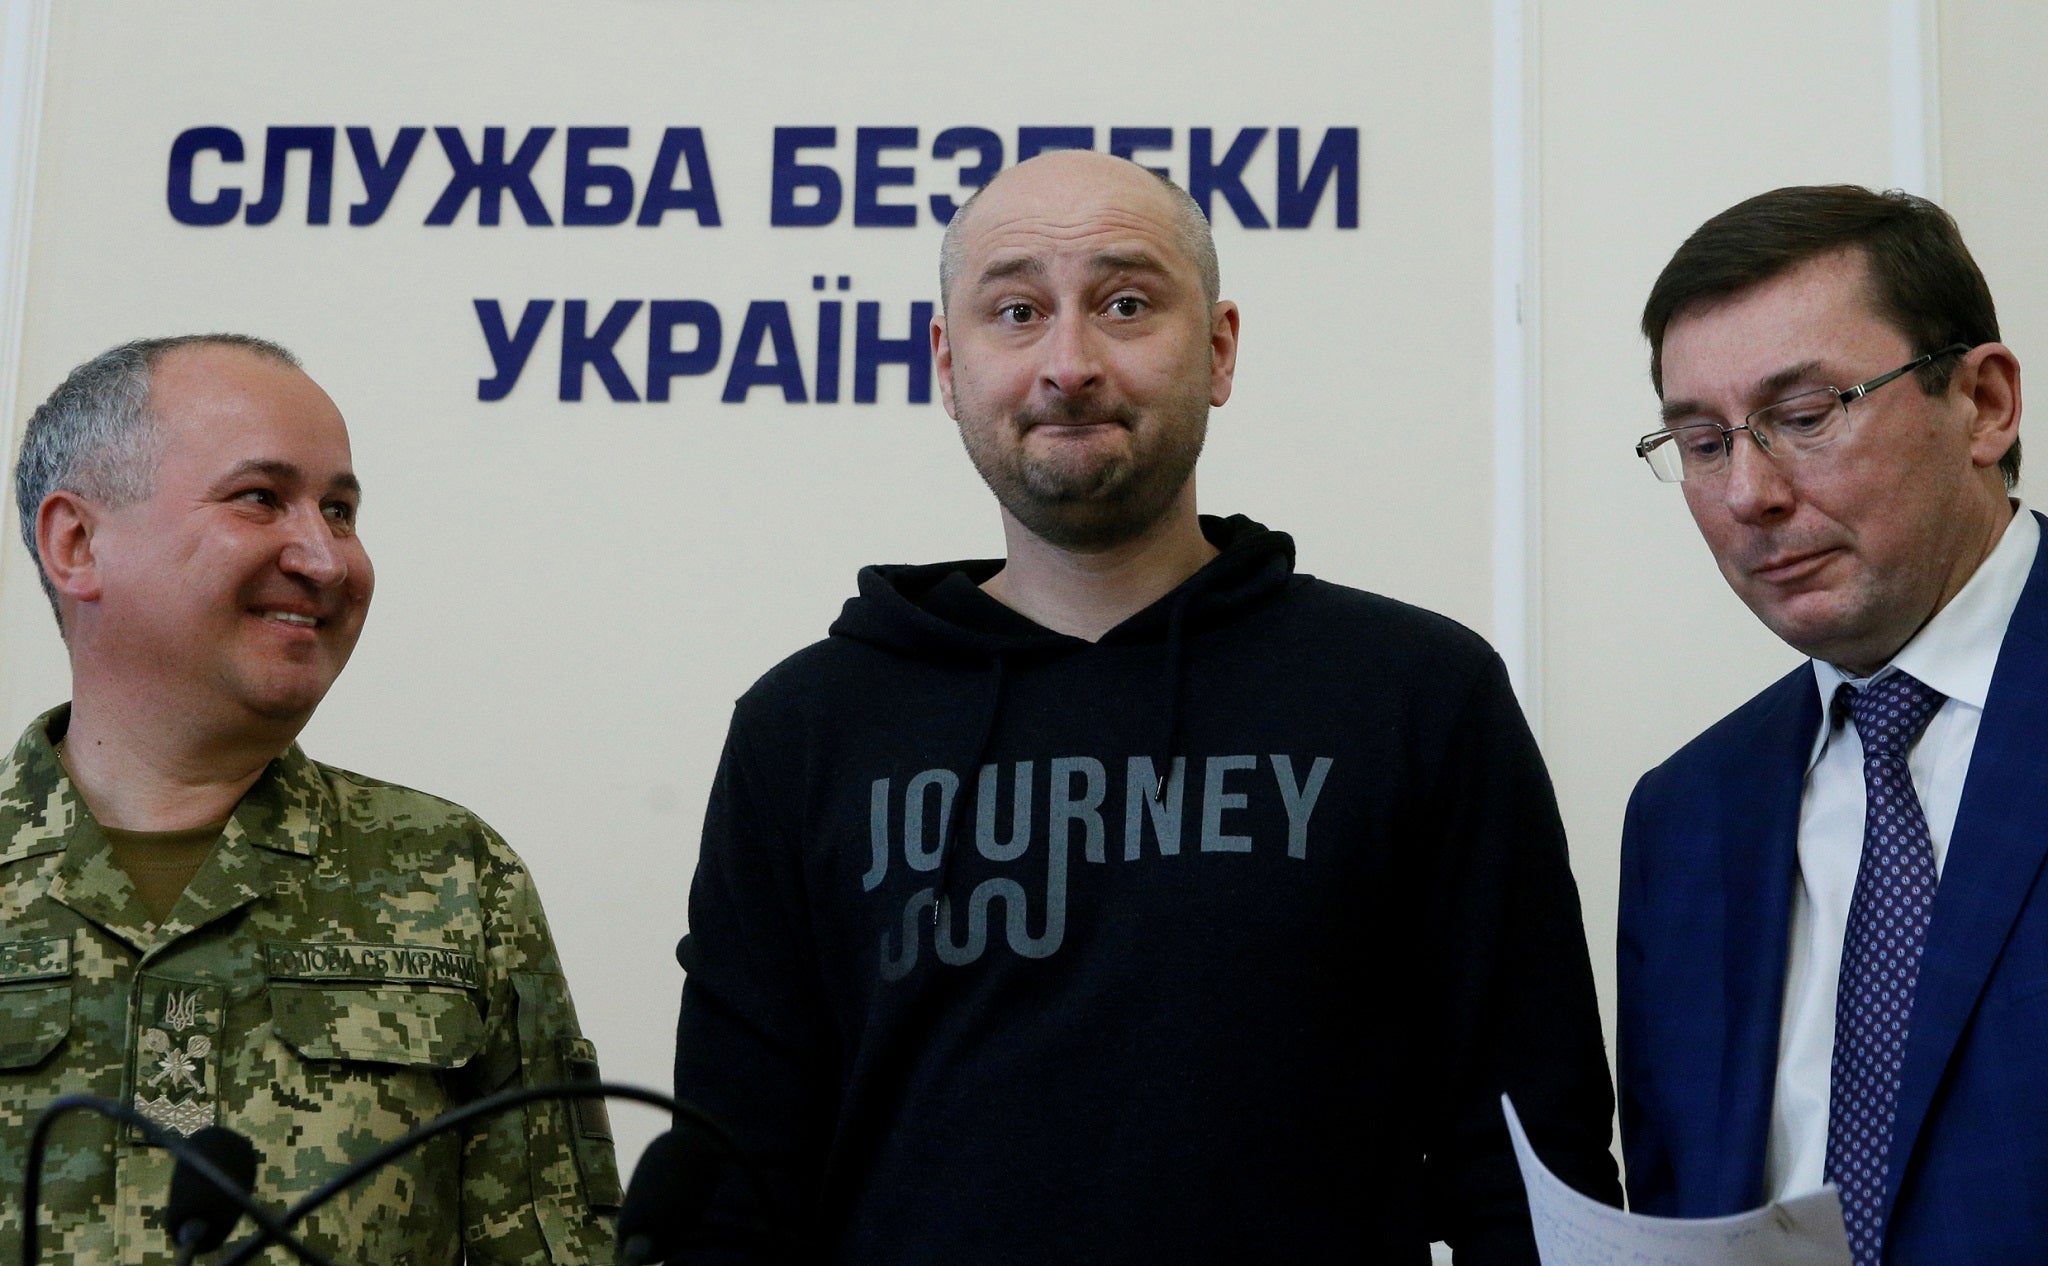 Russian journalist Arkady Babchenko (centre), who was reported murdered in the Ukrainian capital on May 29, Ukrainian Prosecutor General Yuriy Lutsenko (right) and head of the state security service Vasily Gritsak